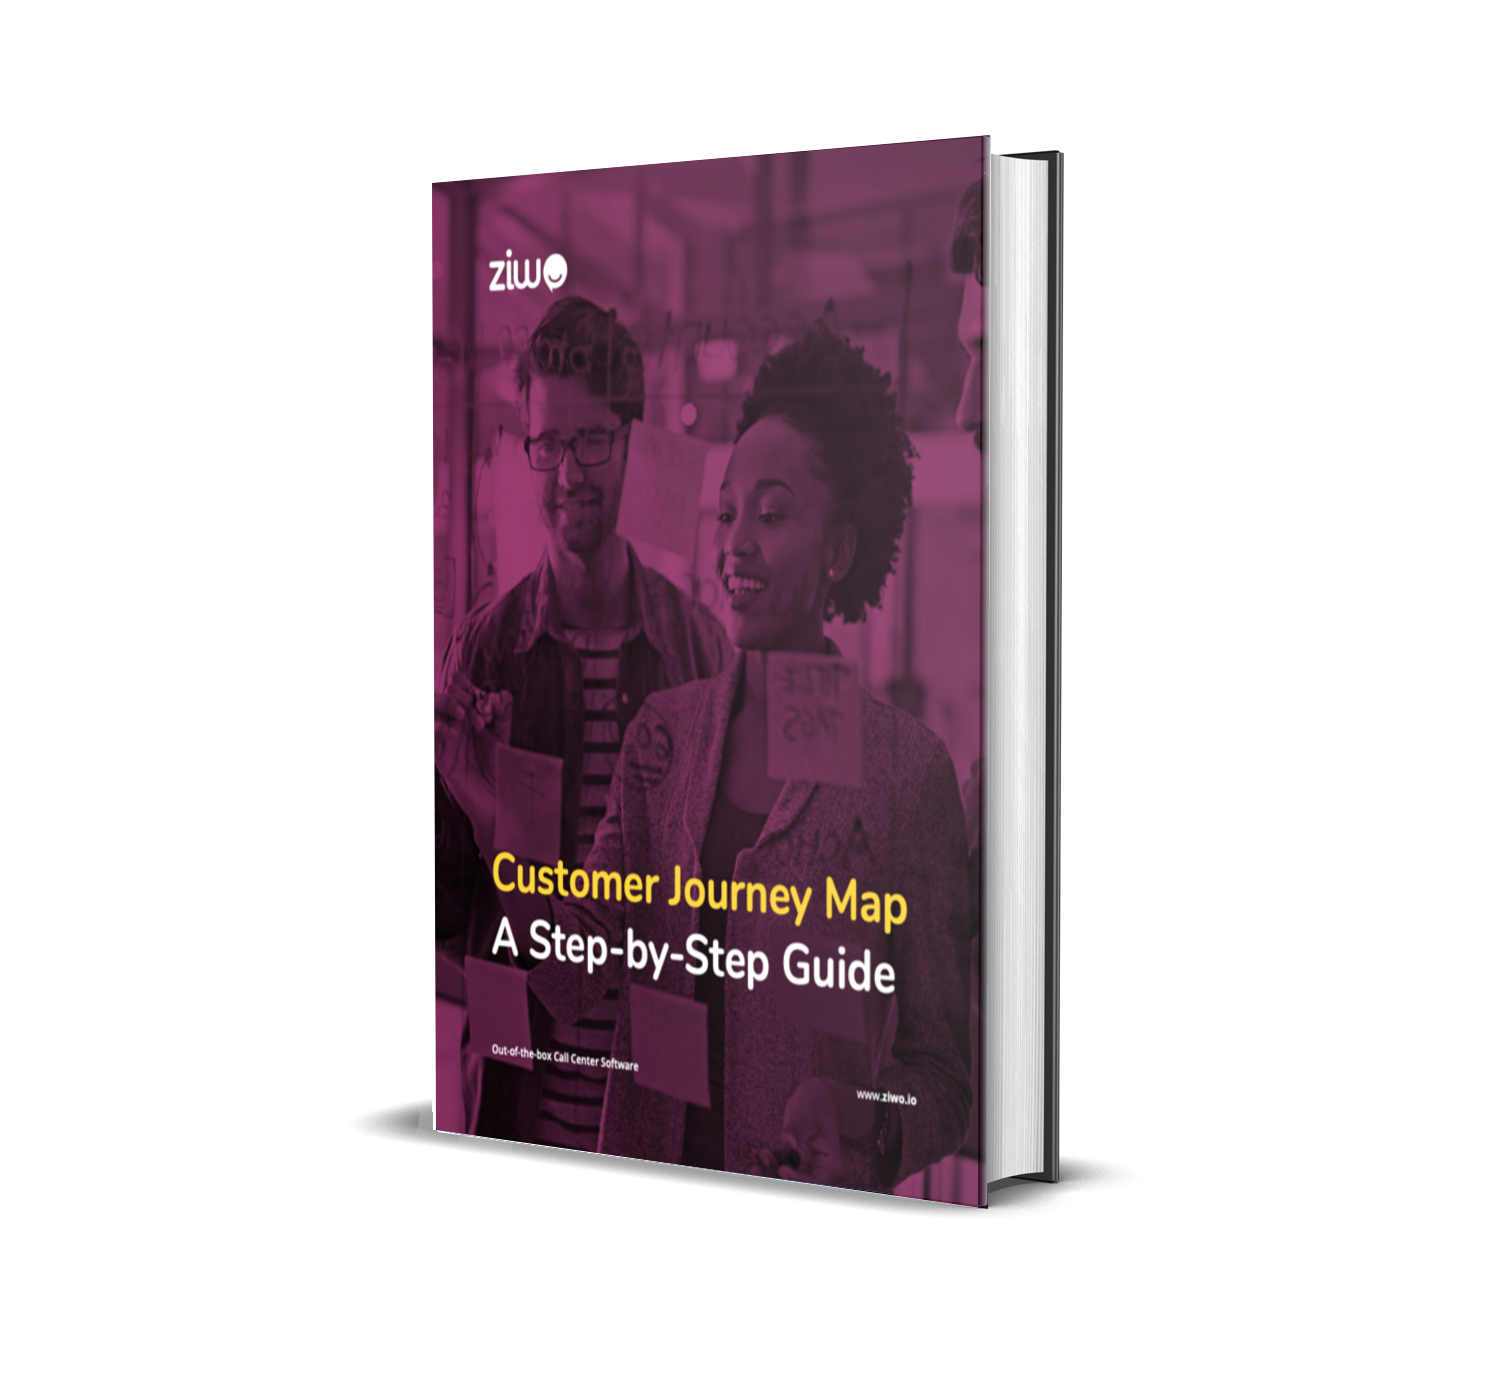 A book with a title "Customer Journey Map - A step-by-step Guide"